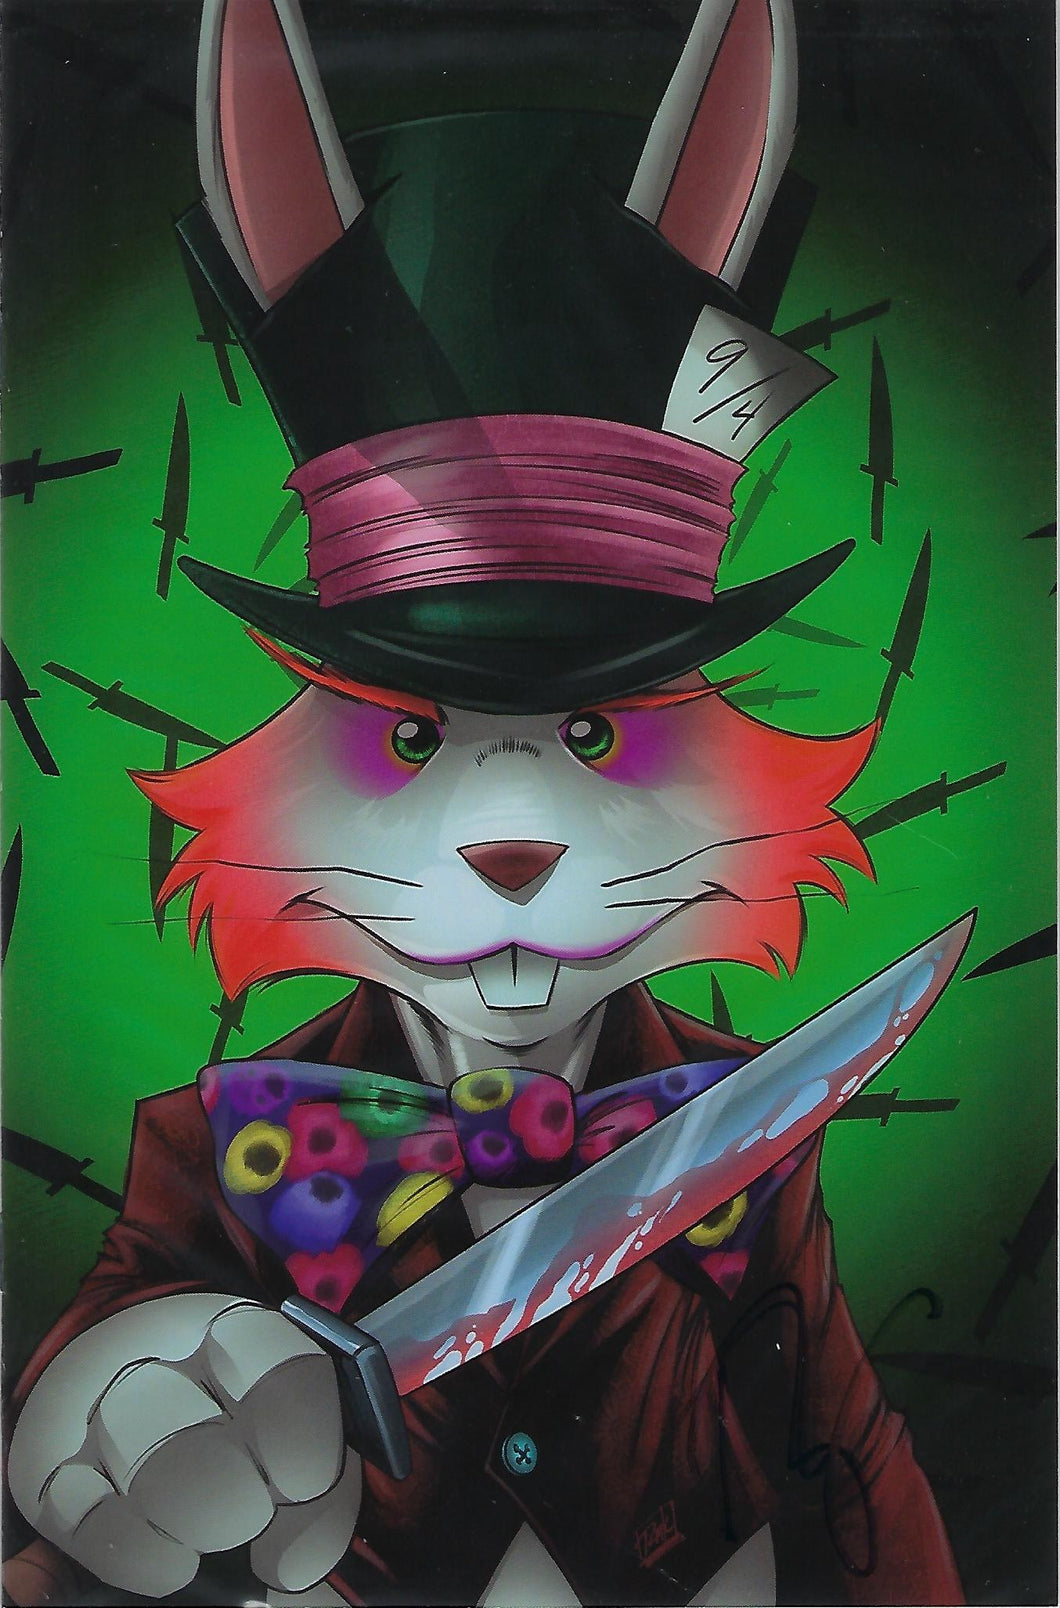 STABBITY EVER AFTER WONDERLAND # 1 RYAN KINCAID EXCLUSIVE SIGNED VIRGIN HATTER COVER !!  NM